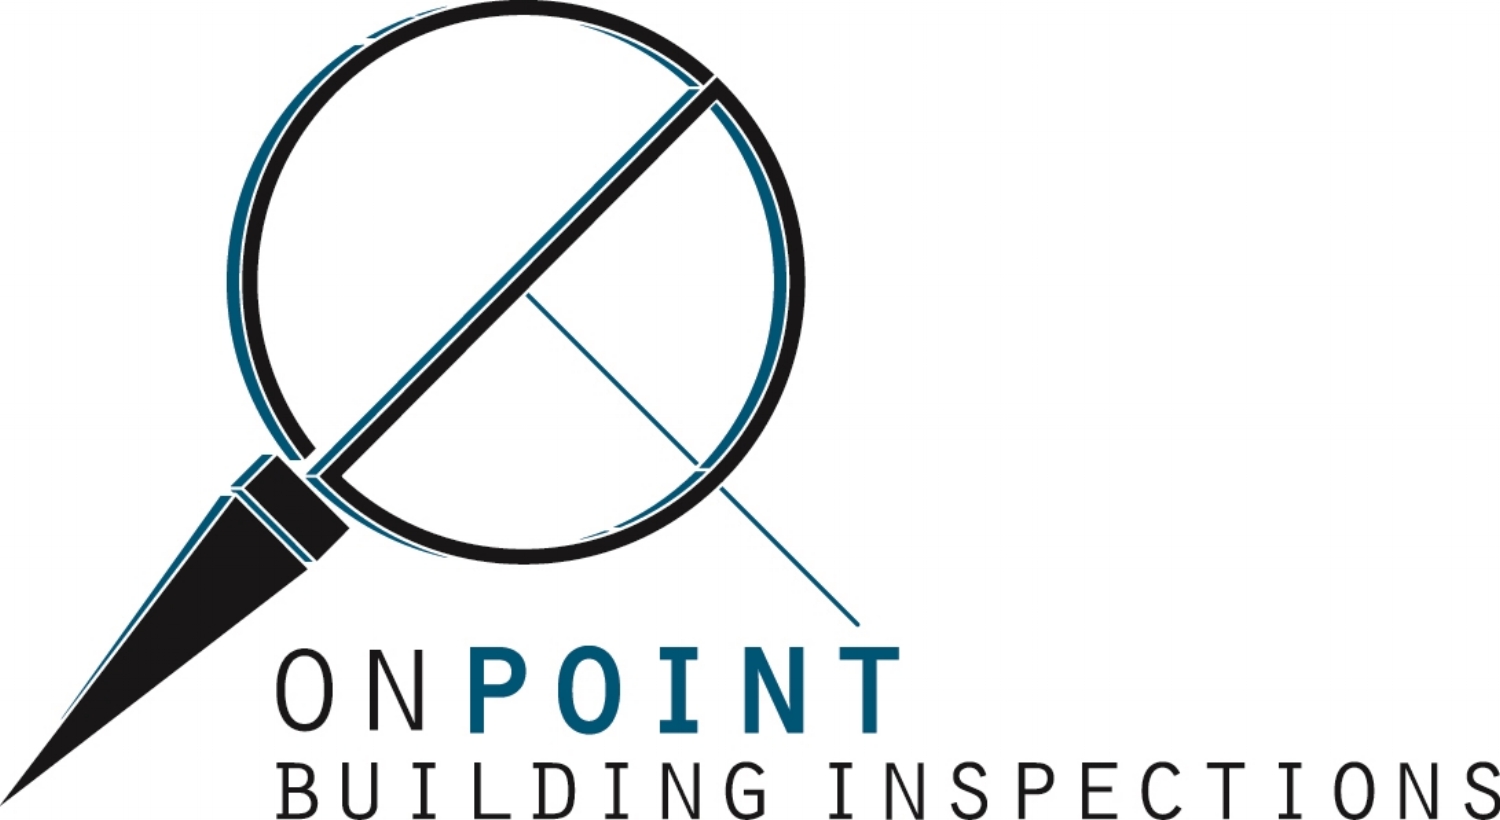 On Point Building Inspections